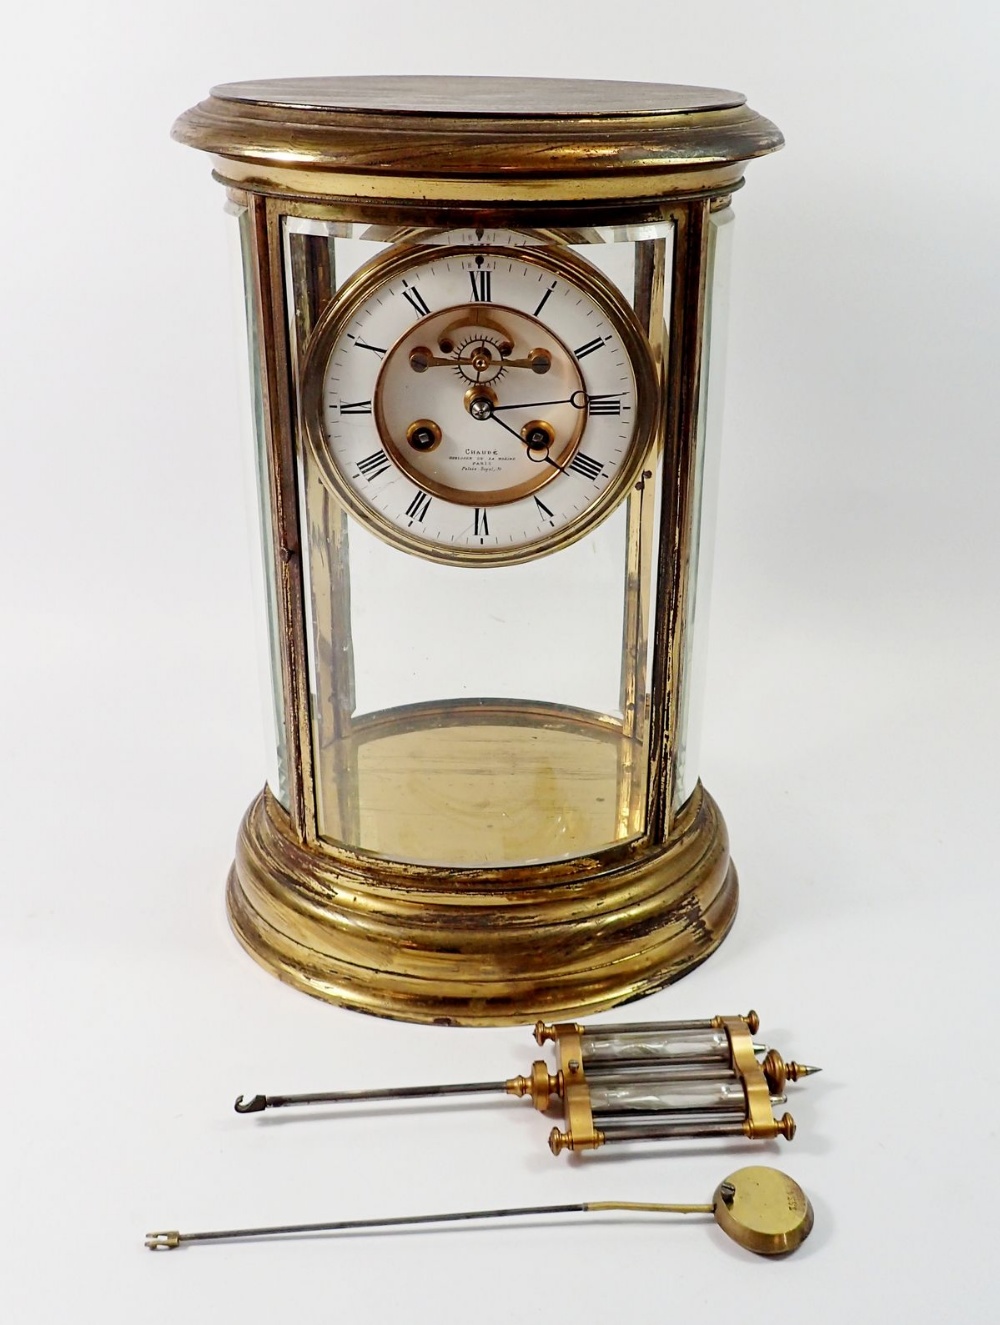 A fine 19th century French oval four glass mantel clock with mercury compensated pendulum by Chaude,